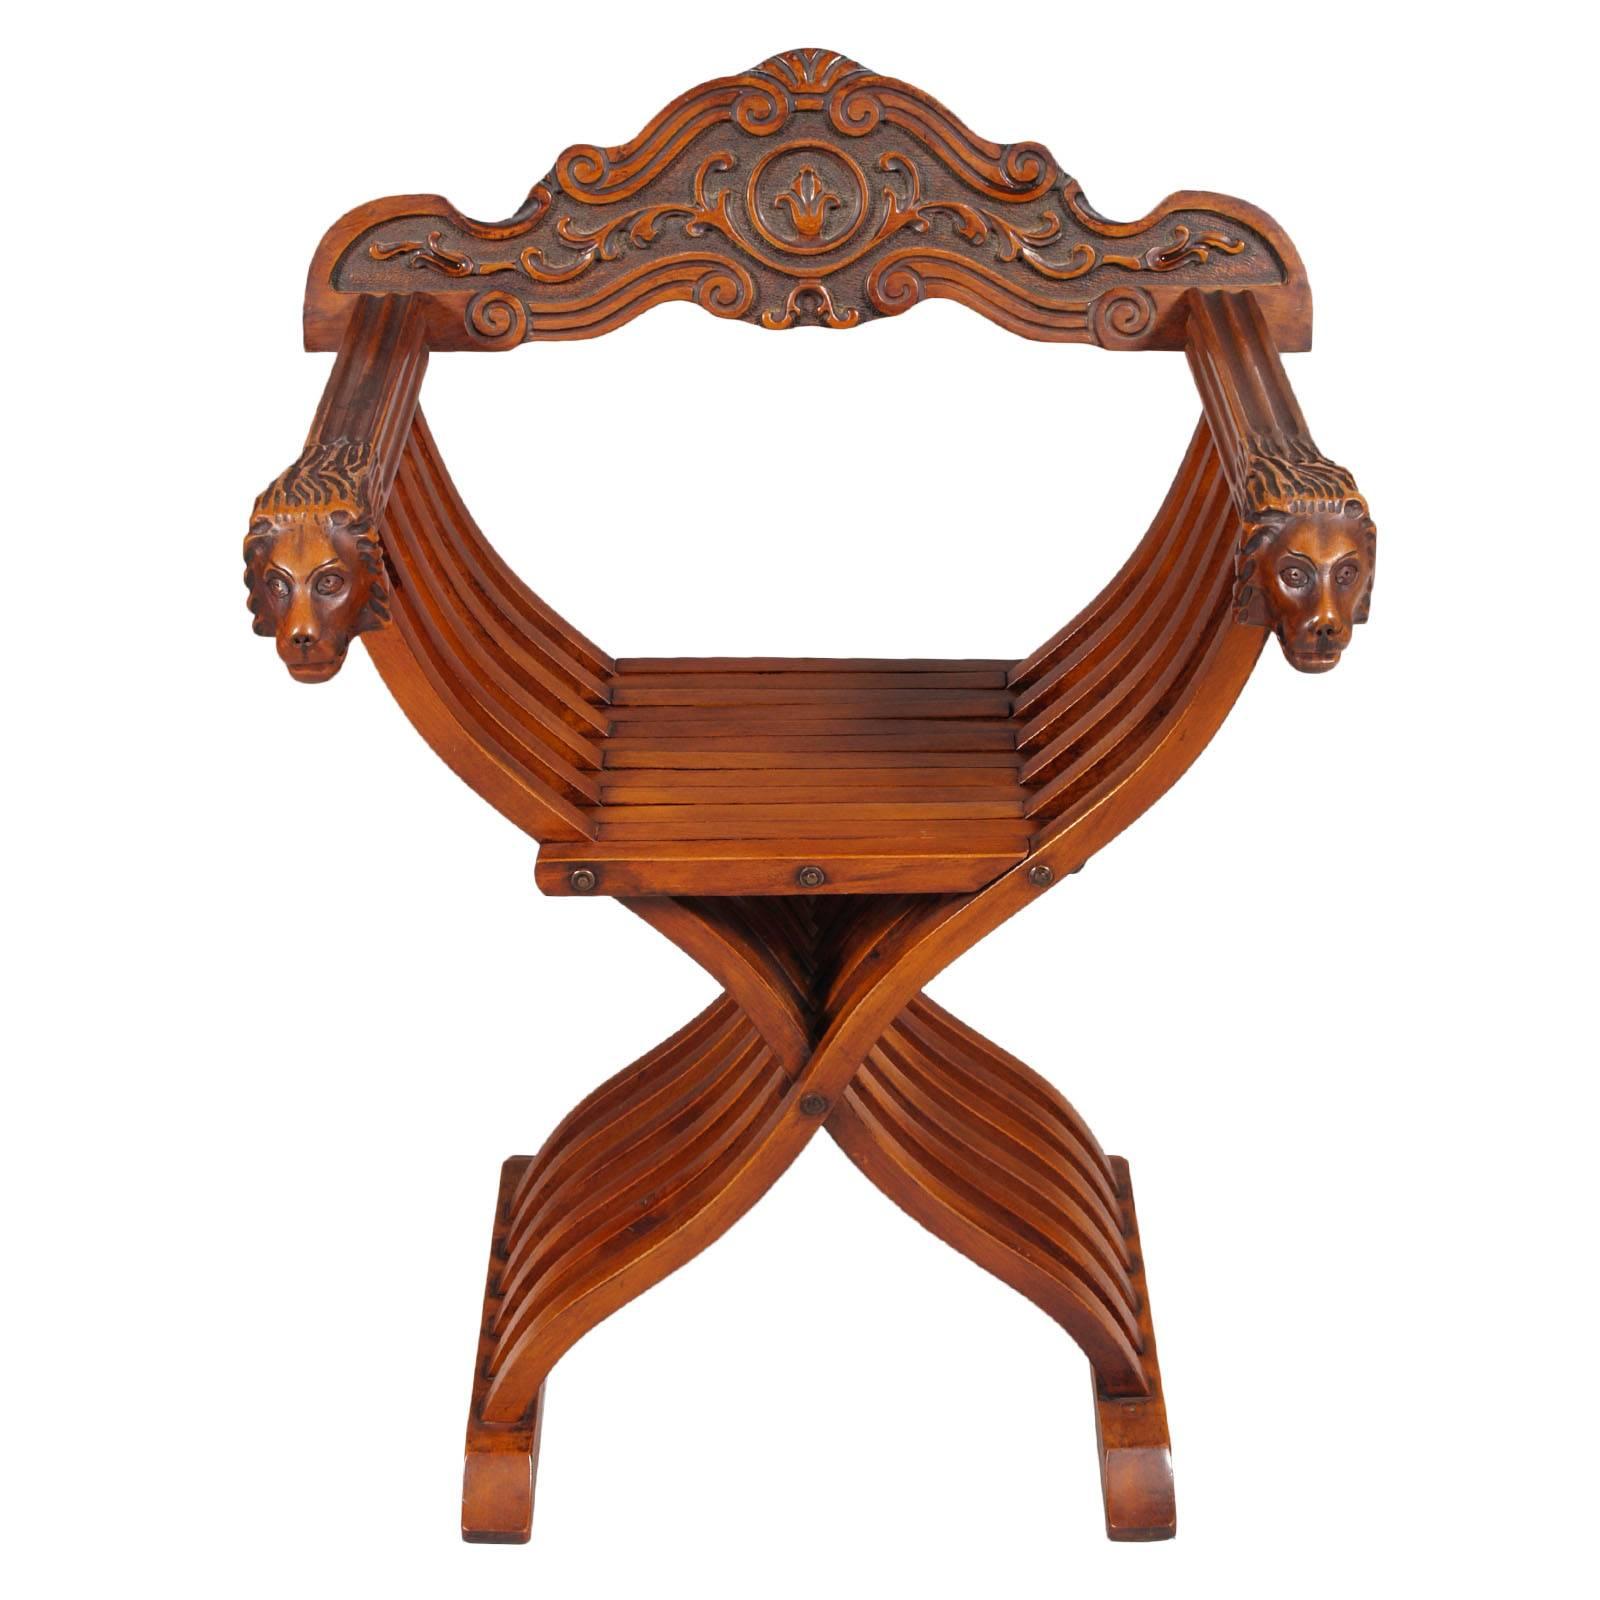 Important Original Florentine Renaissance Savonarola chair in carved walnut restored and polished to wax. Armrests ending with two finely hand-carved heads of lion: type of finish produced to indicate the power of the one who used it


About :